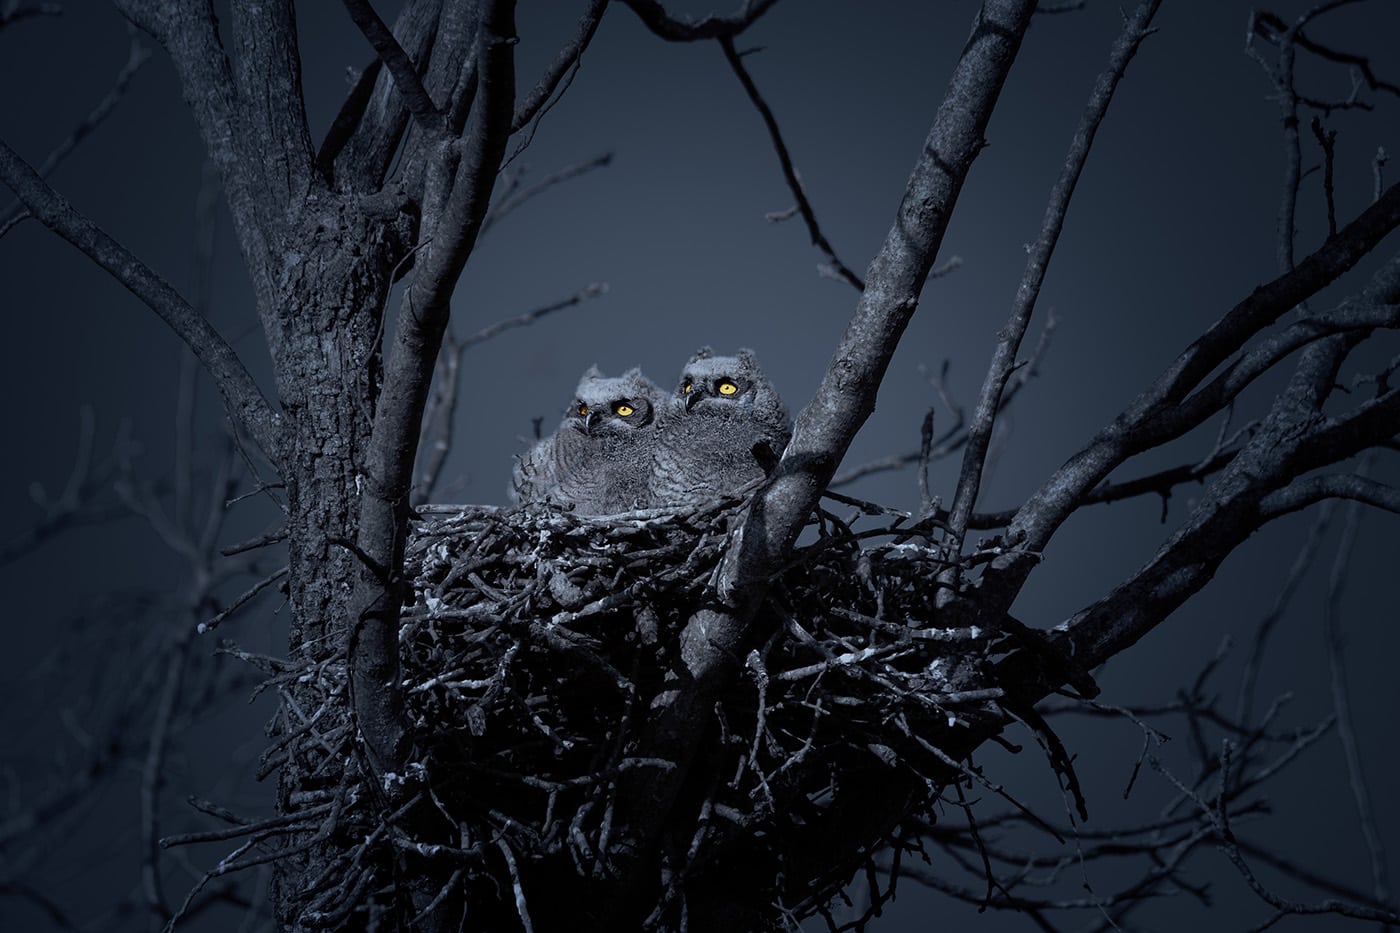 Two Nesting Baby Great Horned Owls At Night